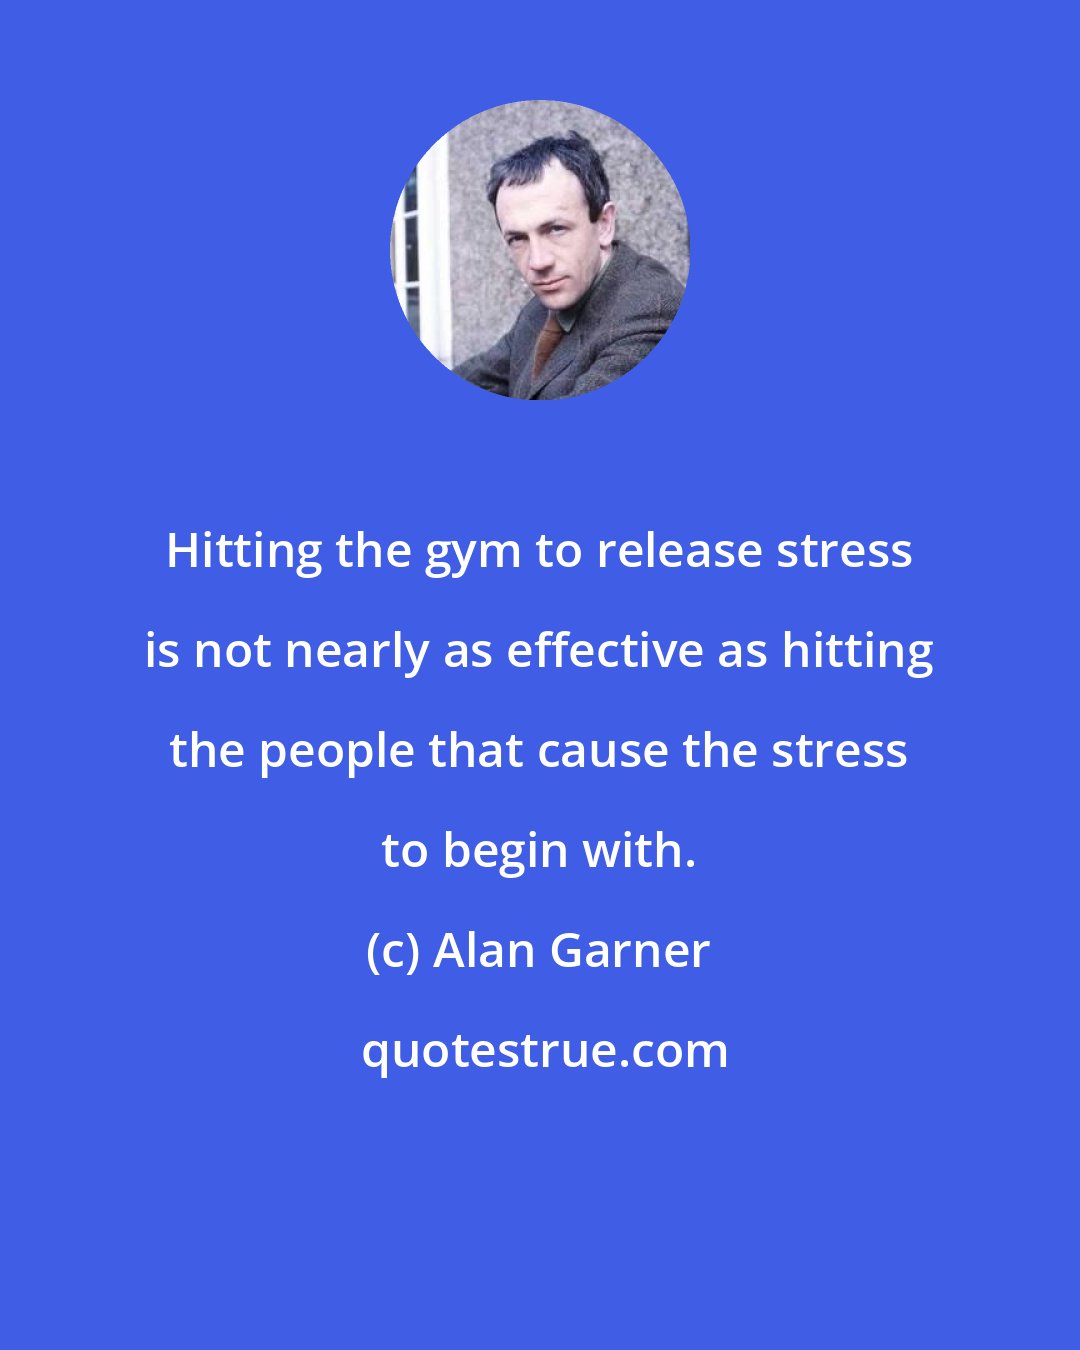 Alan Garner: Hitting the gym to release stress is not nearly as effective as hitting the people that cause the stress to begin with.